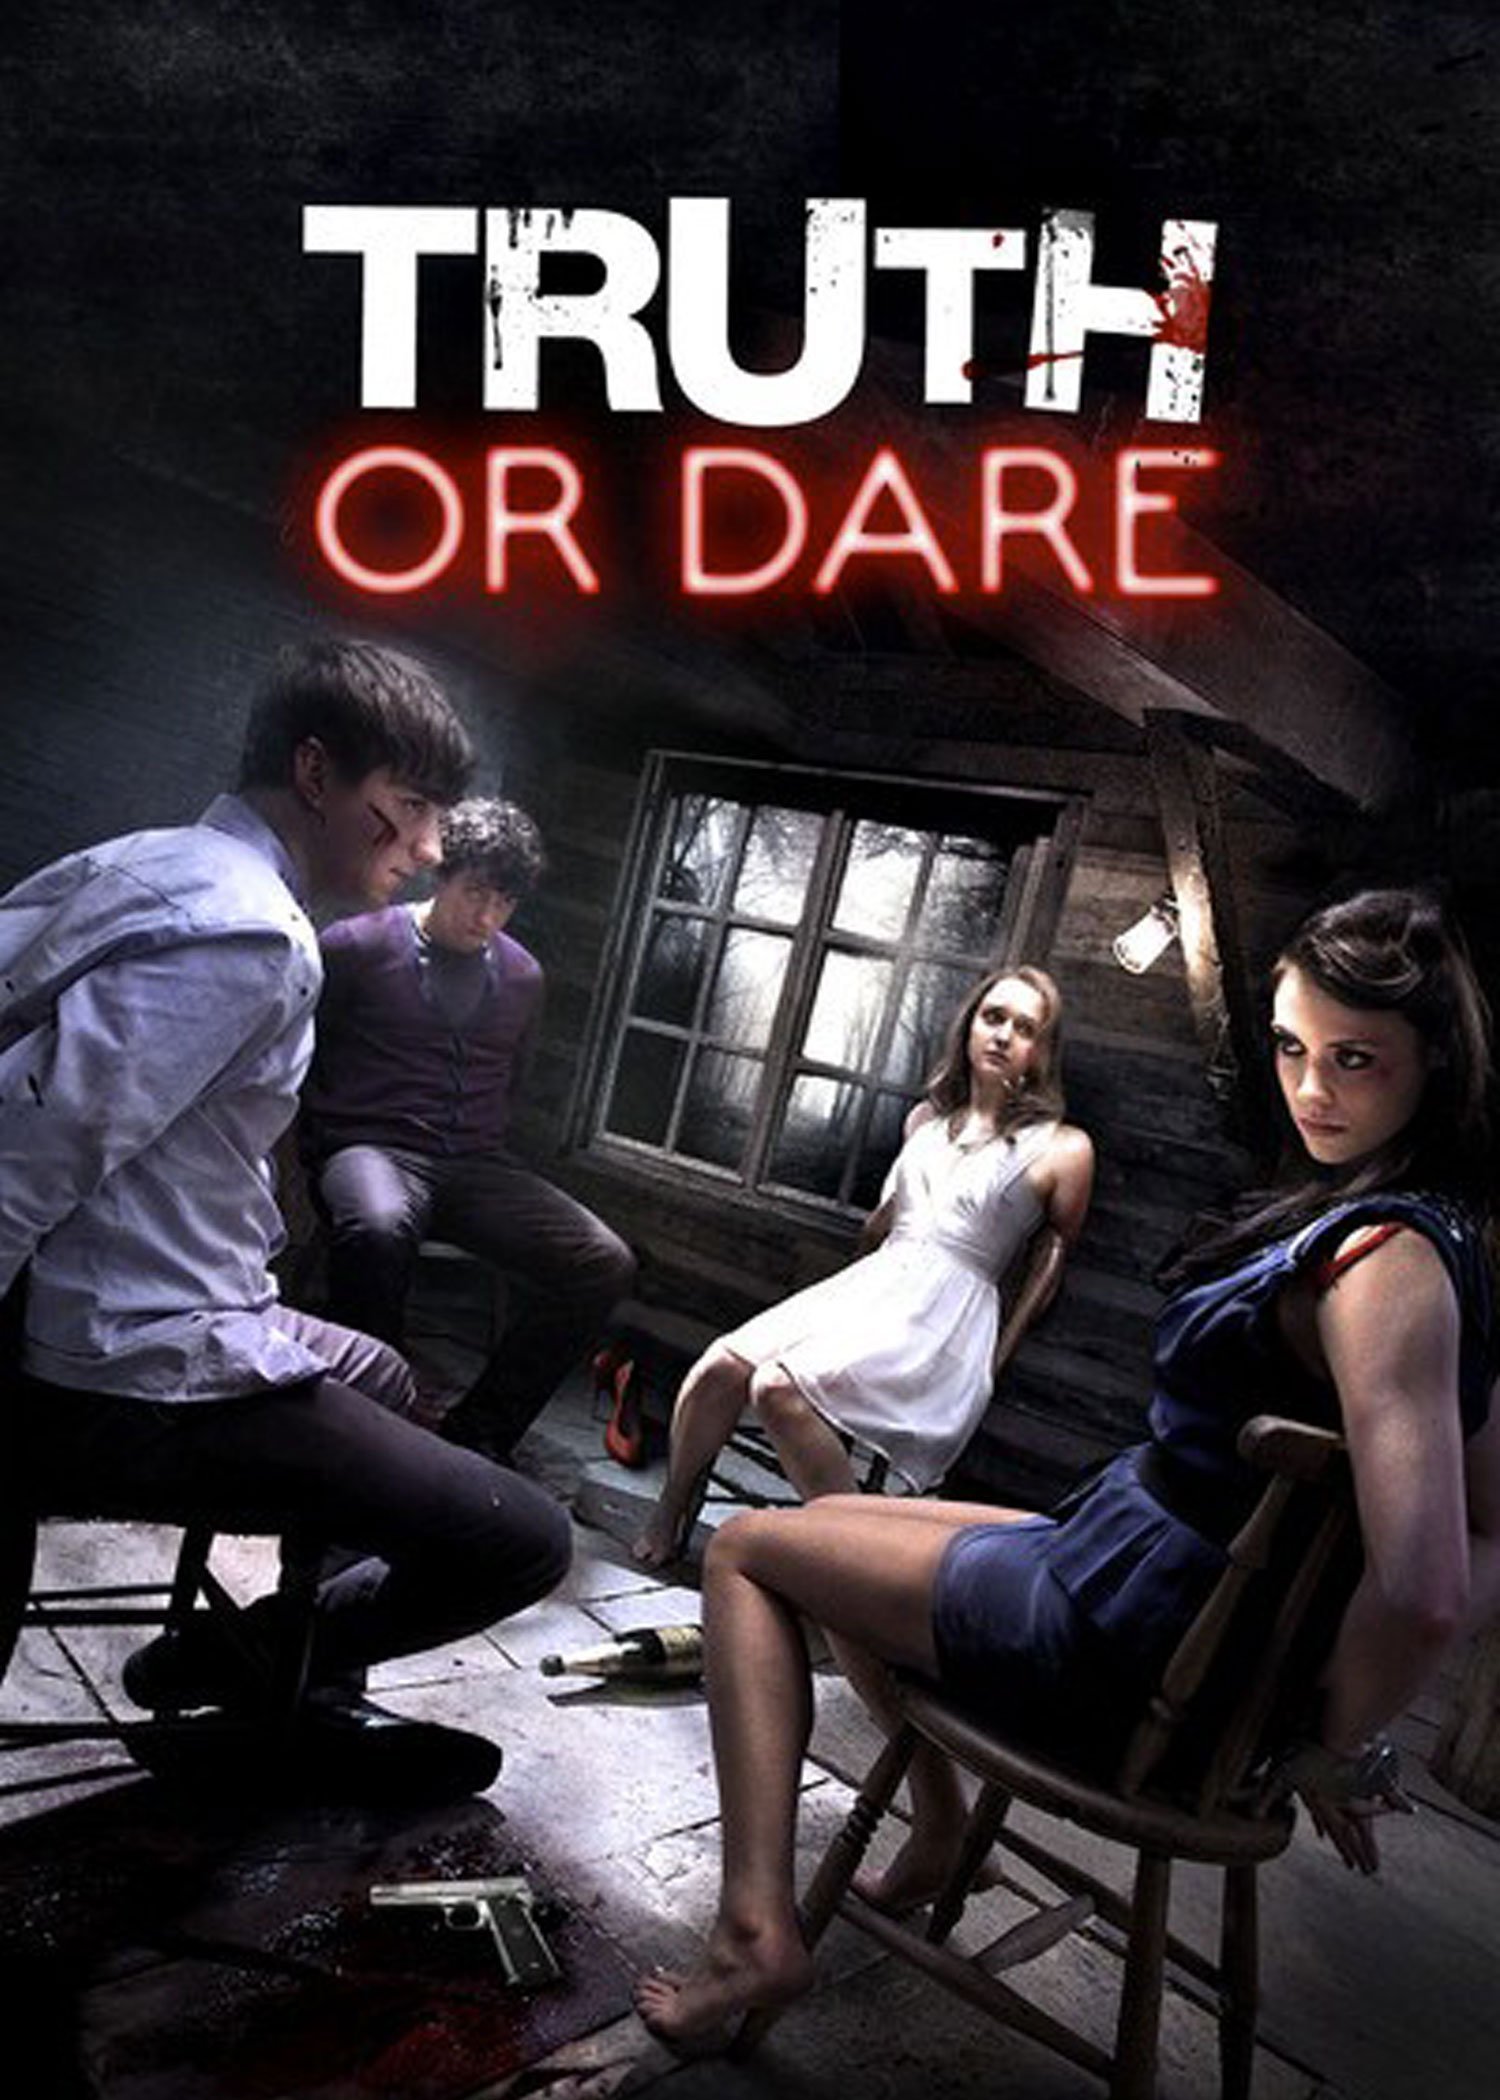 christine mcentyre recommends Truth Or Dare Sex Movies